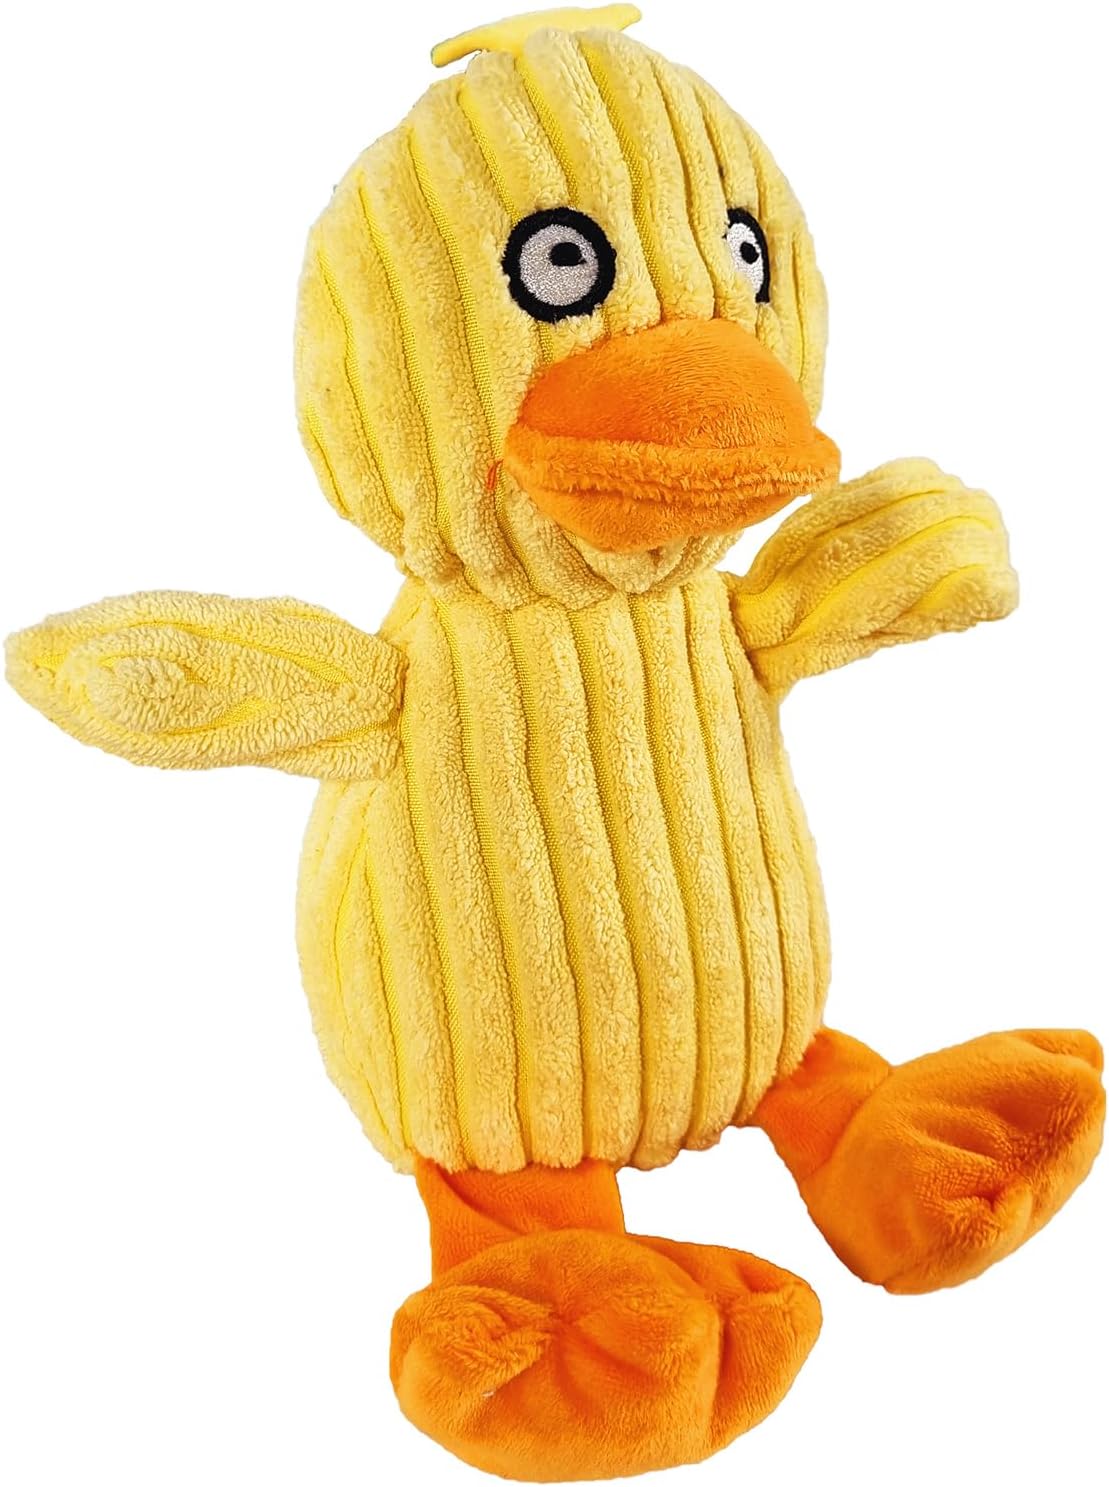 Dog Toy, Teeth Cleaning Plush Toy, Interactive Dog Chew Toy, Non-Toxic and Safe Toy for Dogs, Chew Teeth Exercise, Cute Chicken Plush Chew Toy, Yellow Color Duck